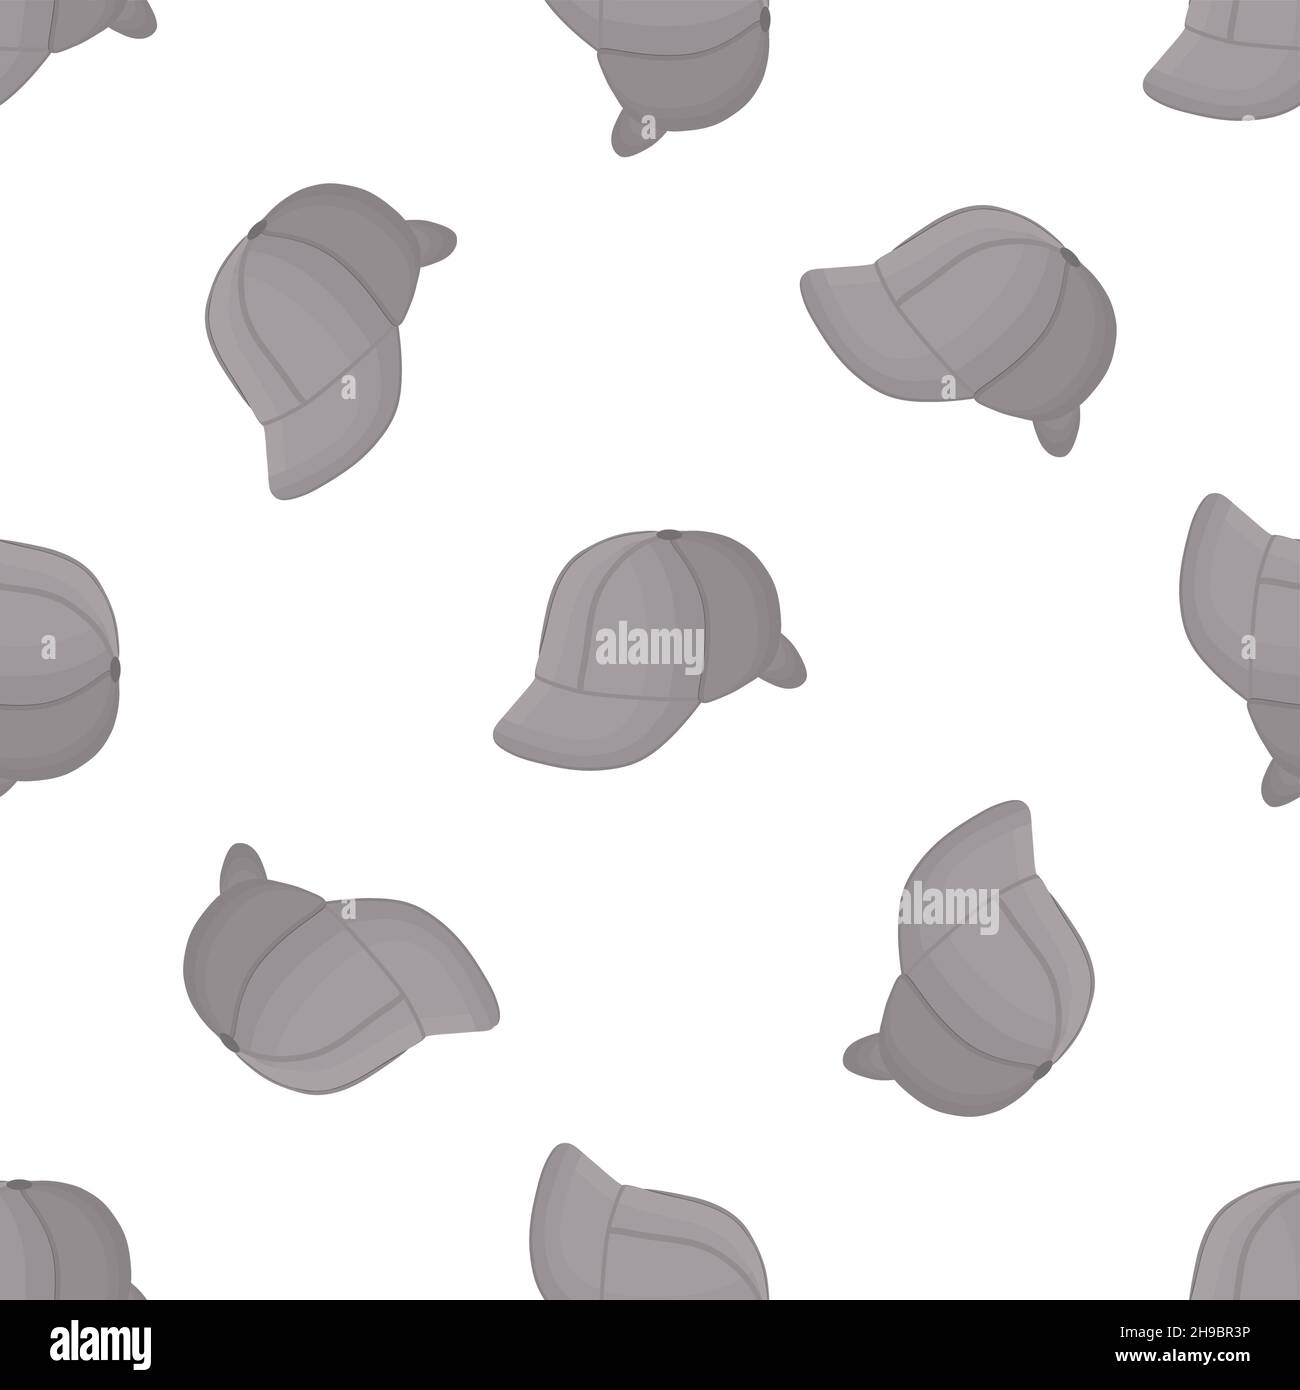 Color pattern hats sherlock holmes, beautiful caps in white background. Caps pattern consisting of collection hats sherlock holmes for wearing. Patter Stock Vector